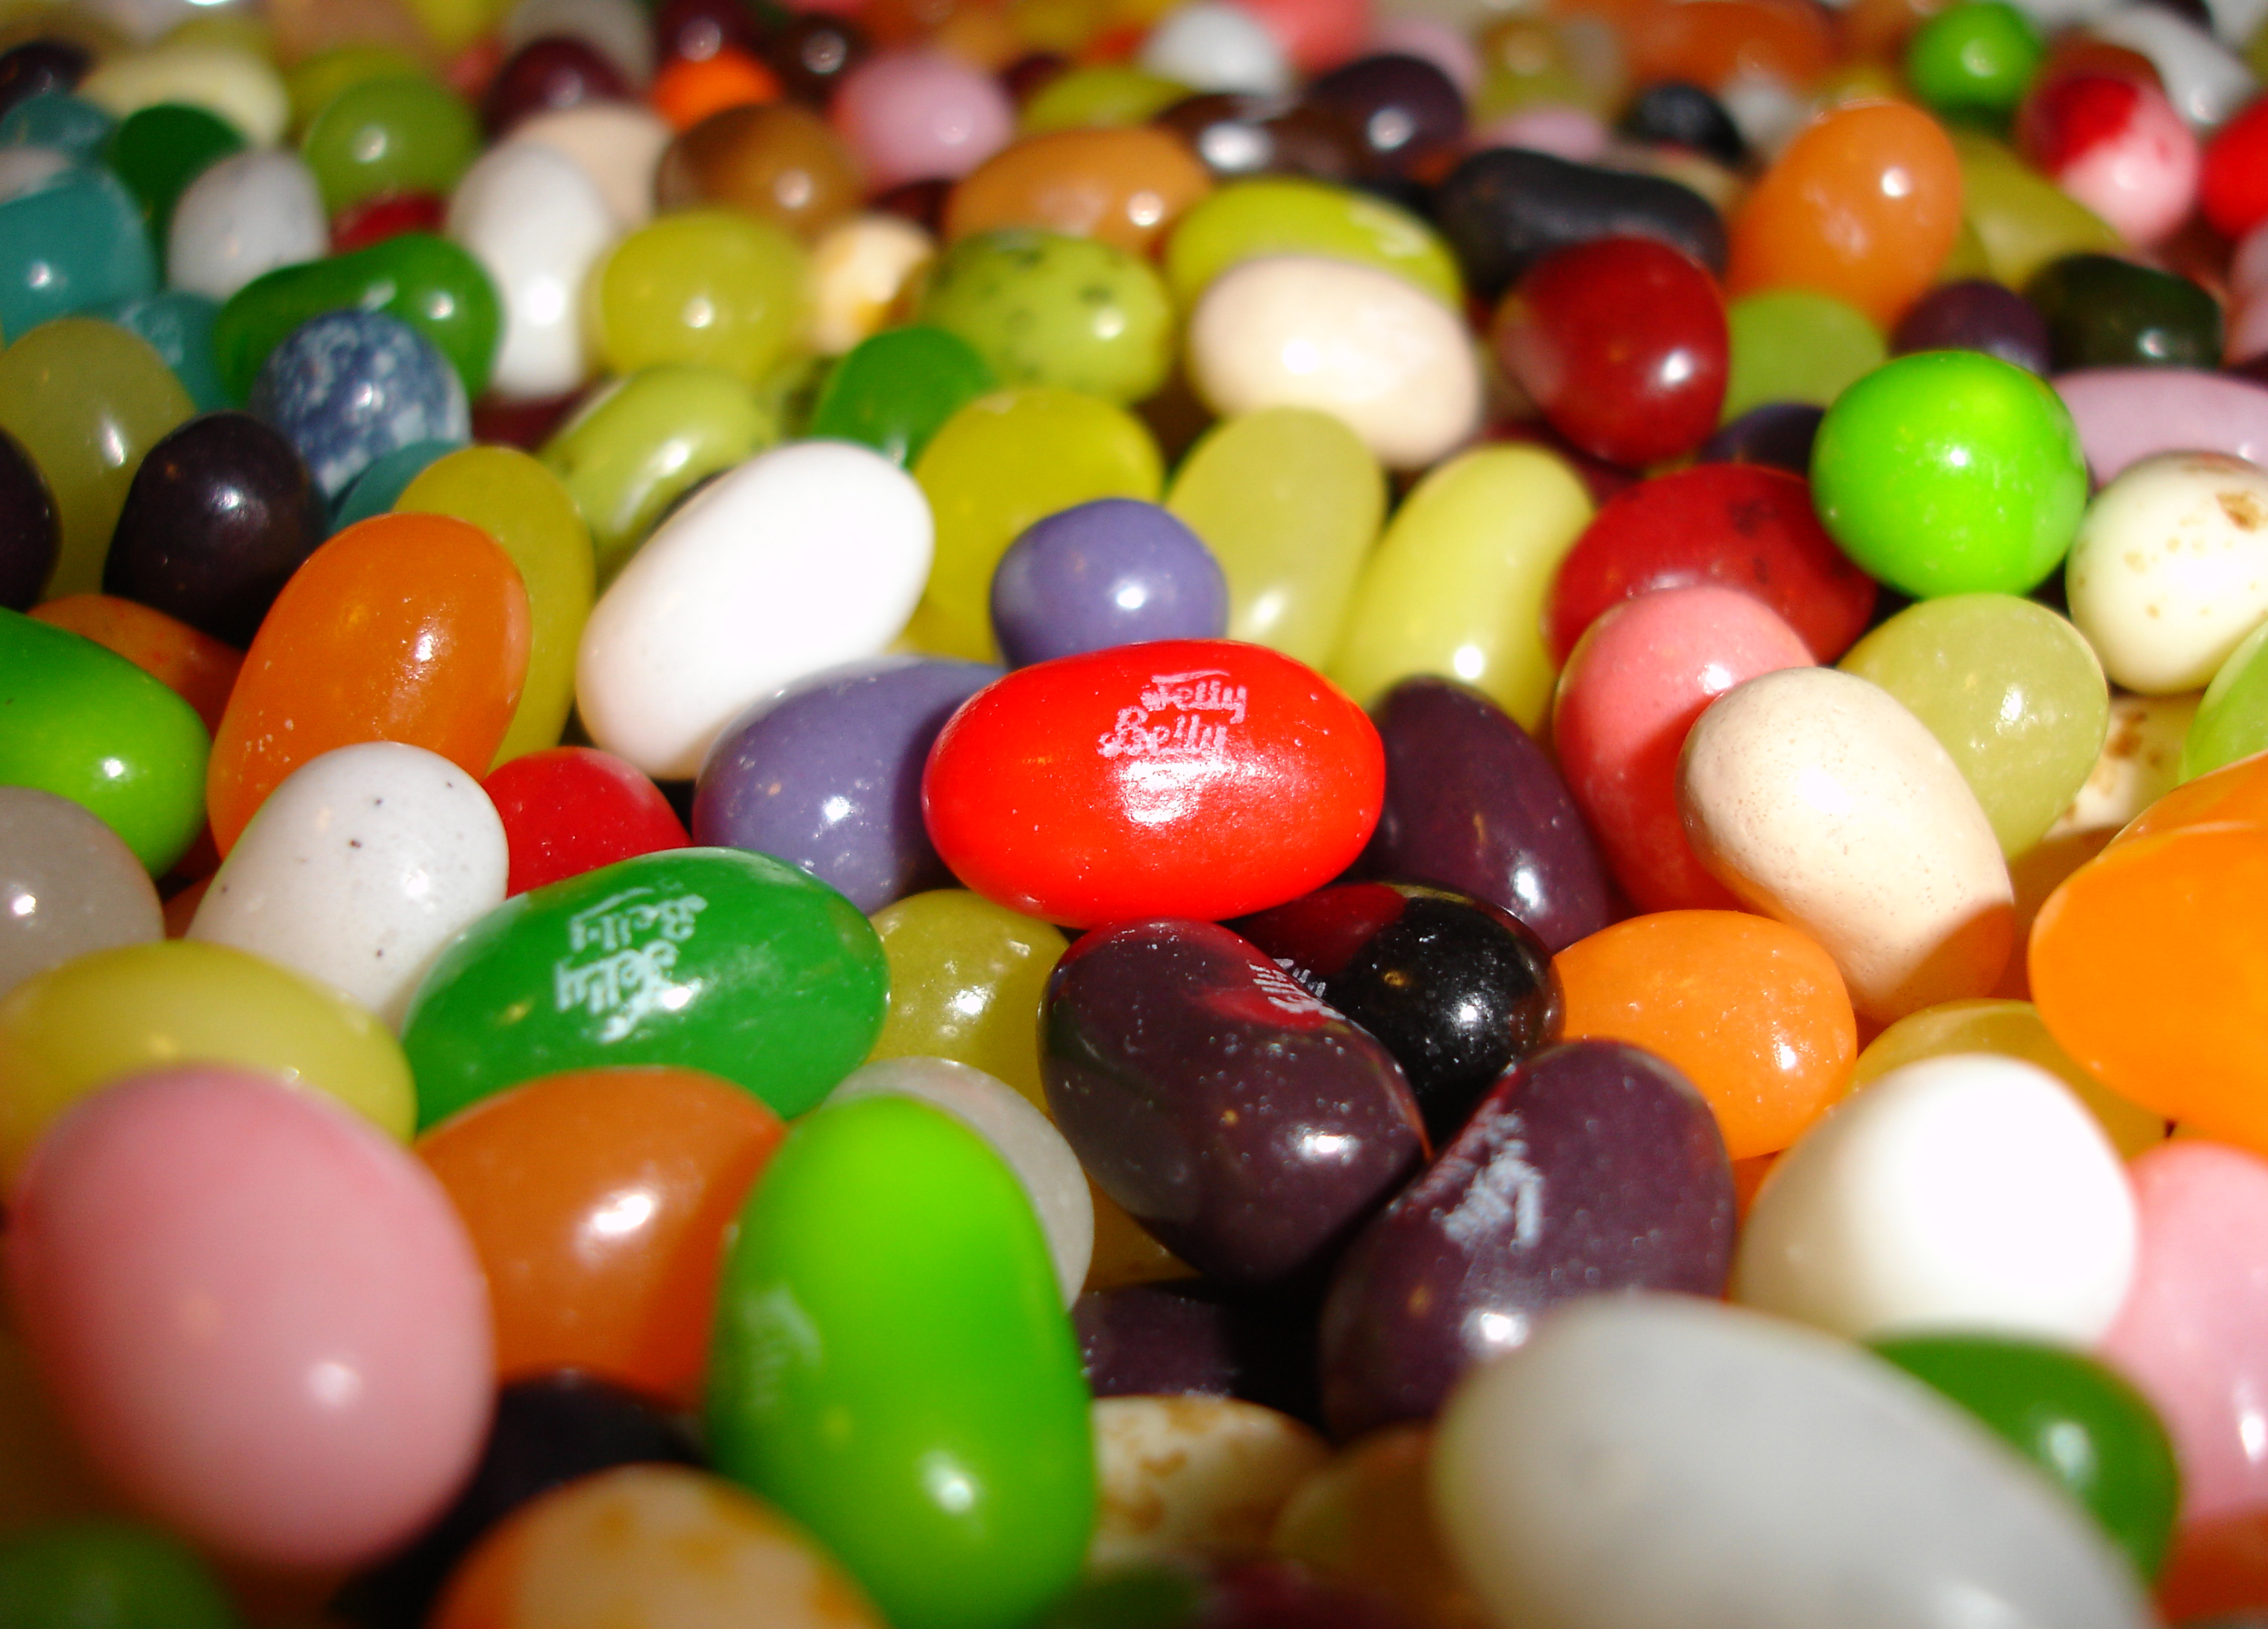 Related image of Jelly Bean Wikipedia.